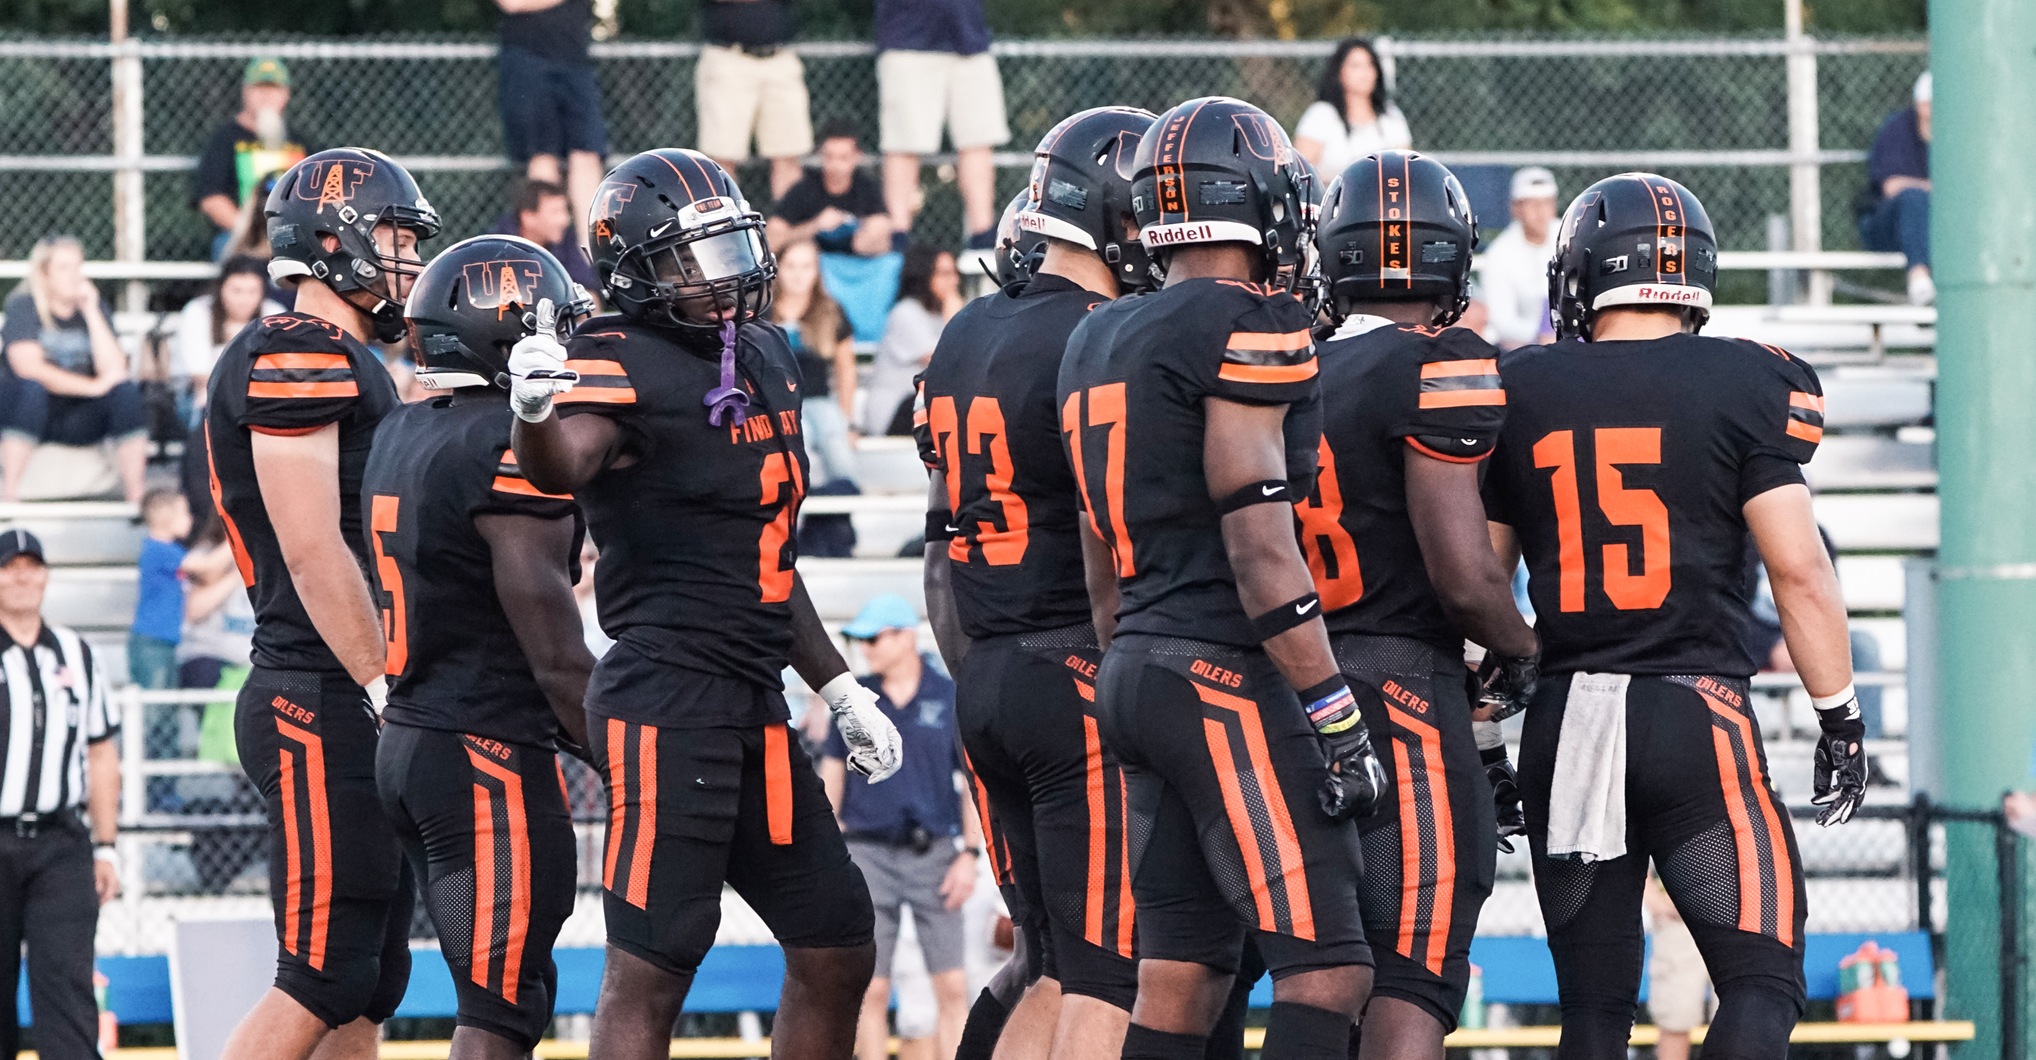 Oilers Host Battlers in Homecoming Game